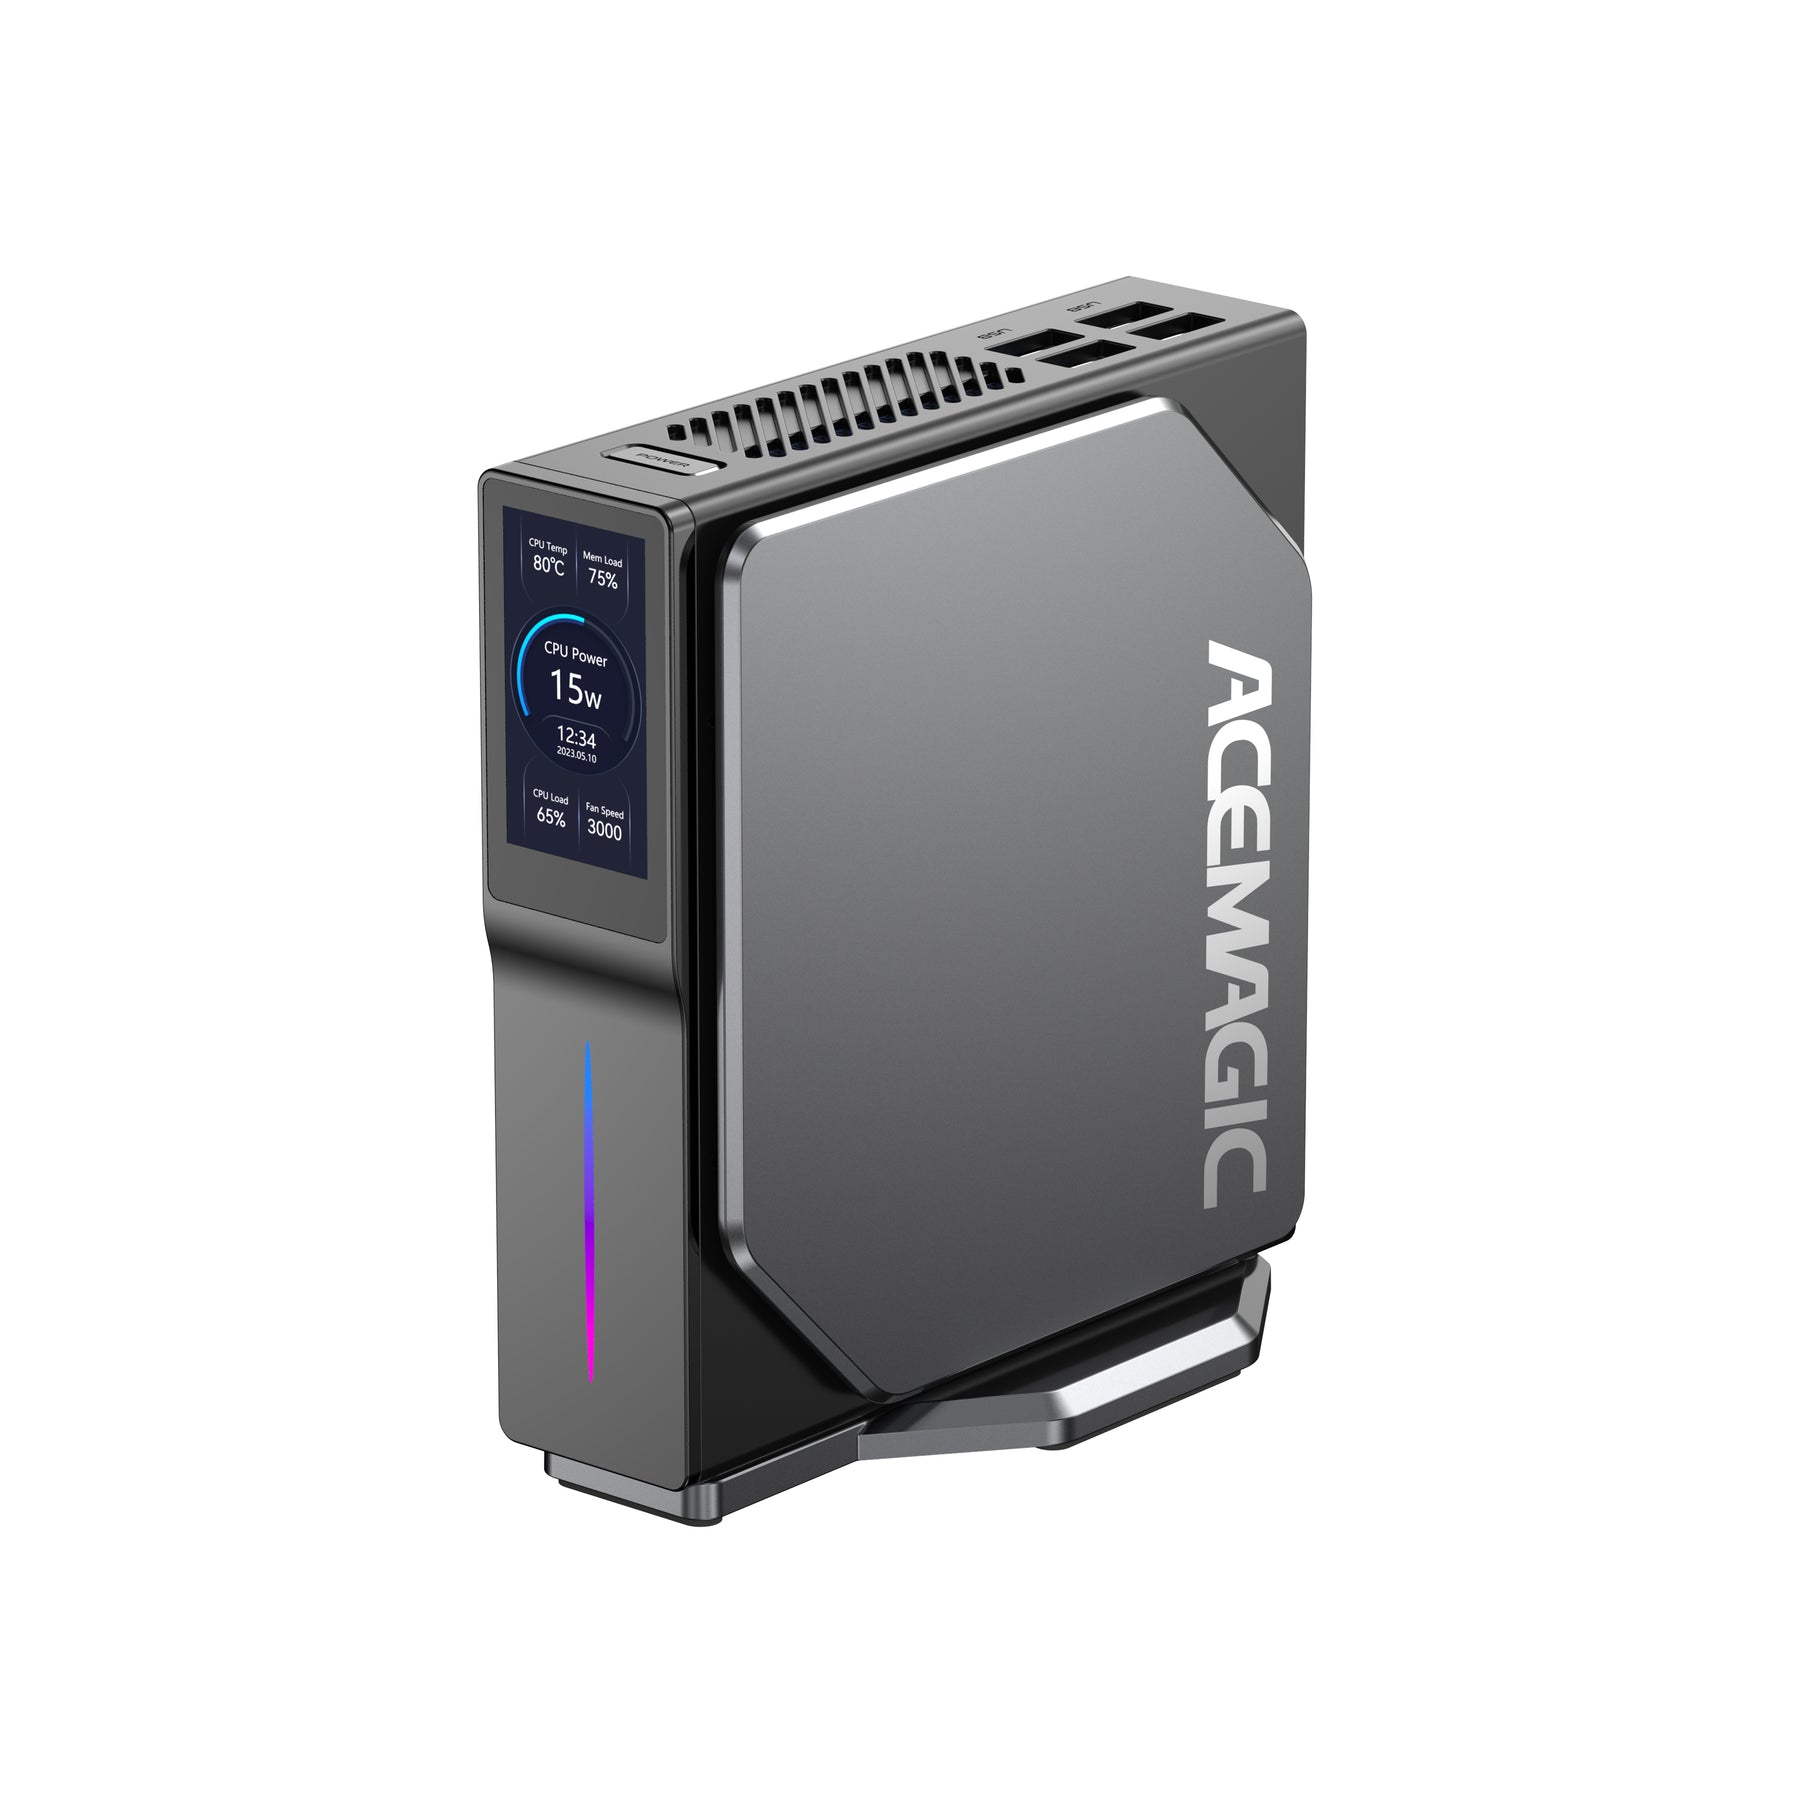 ACEMAGIC S1 - A Processor N95 mini PC with a built-in LCD information  display - CNX Software